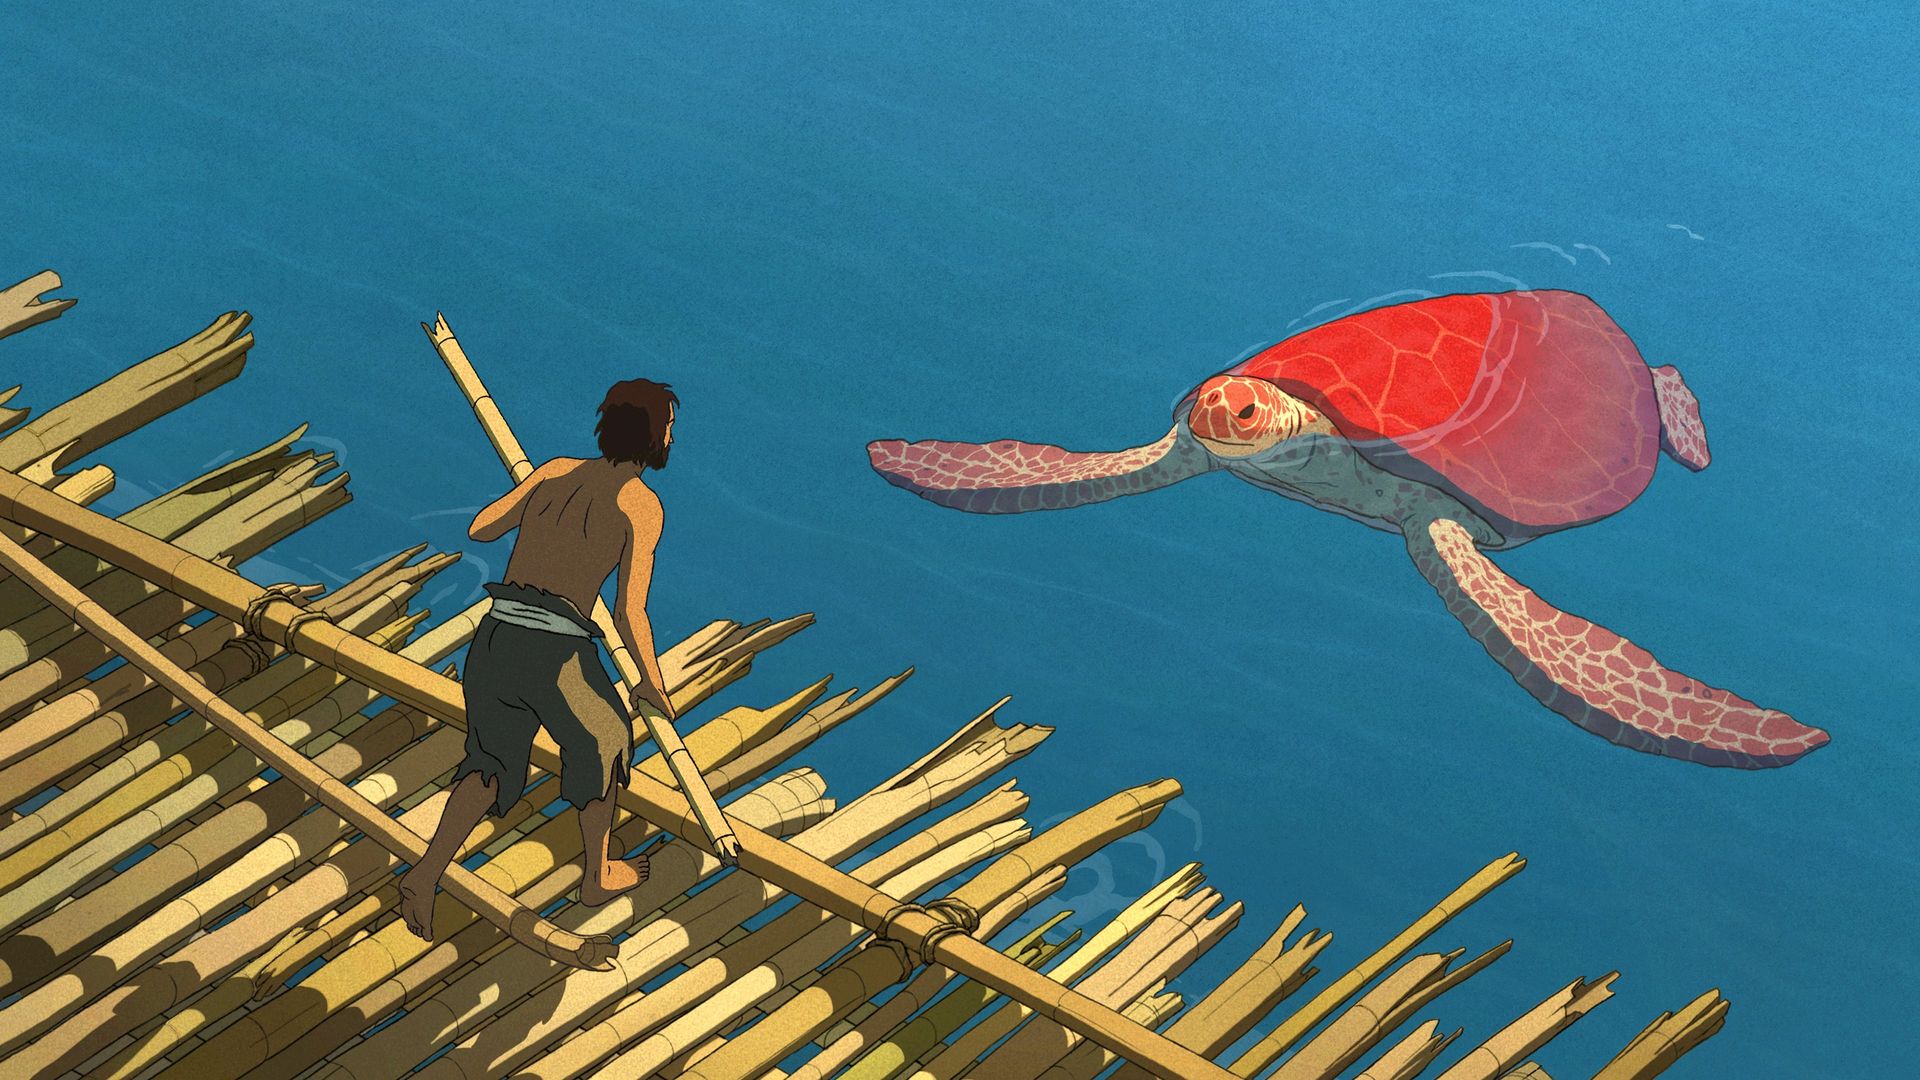 The Red Turtle background